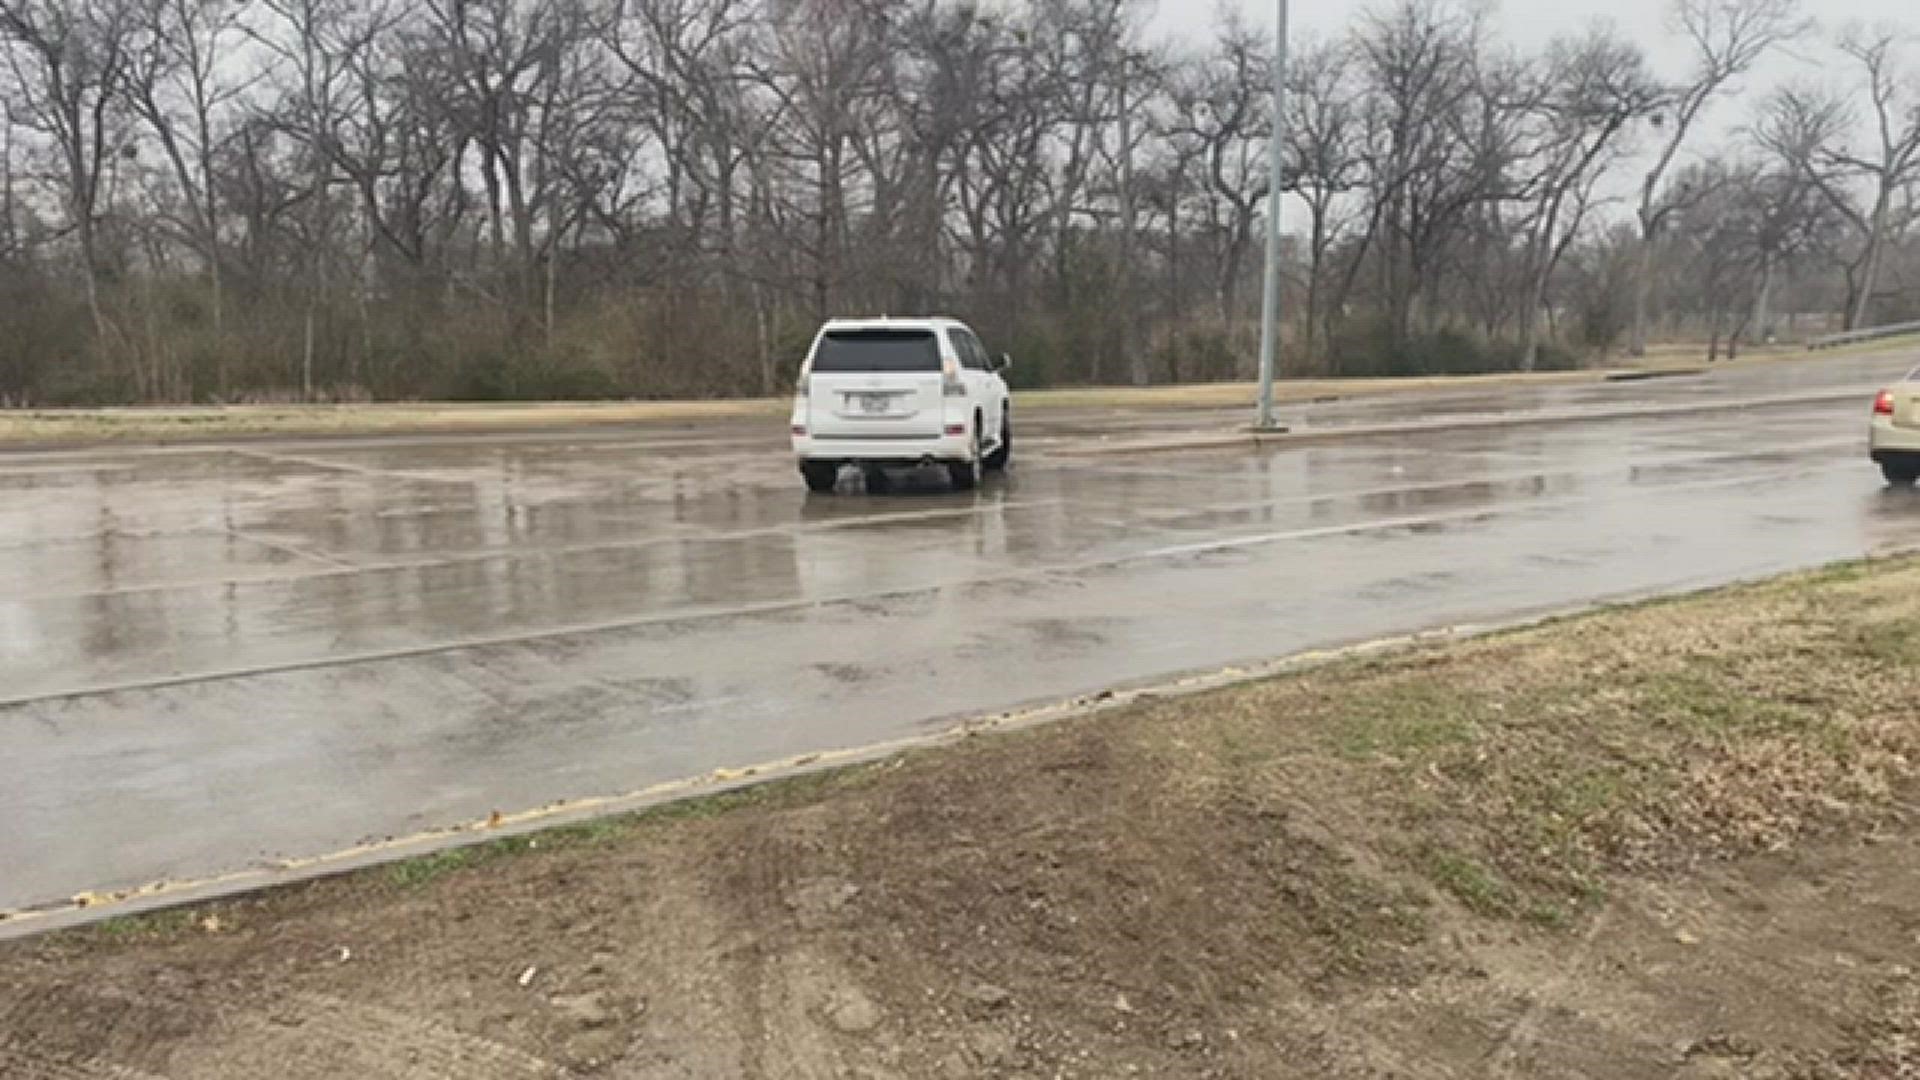 WFAA crews spotted many cars turning around on Royal Ln. near U.S. 75 on Wednesday afternoon. Some cars were stuck at the top of the hill.